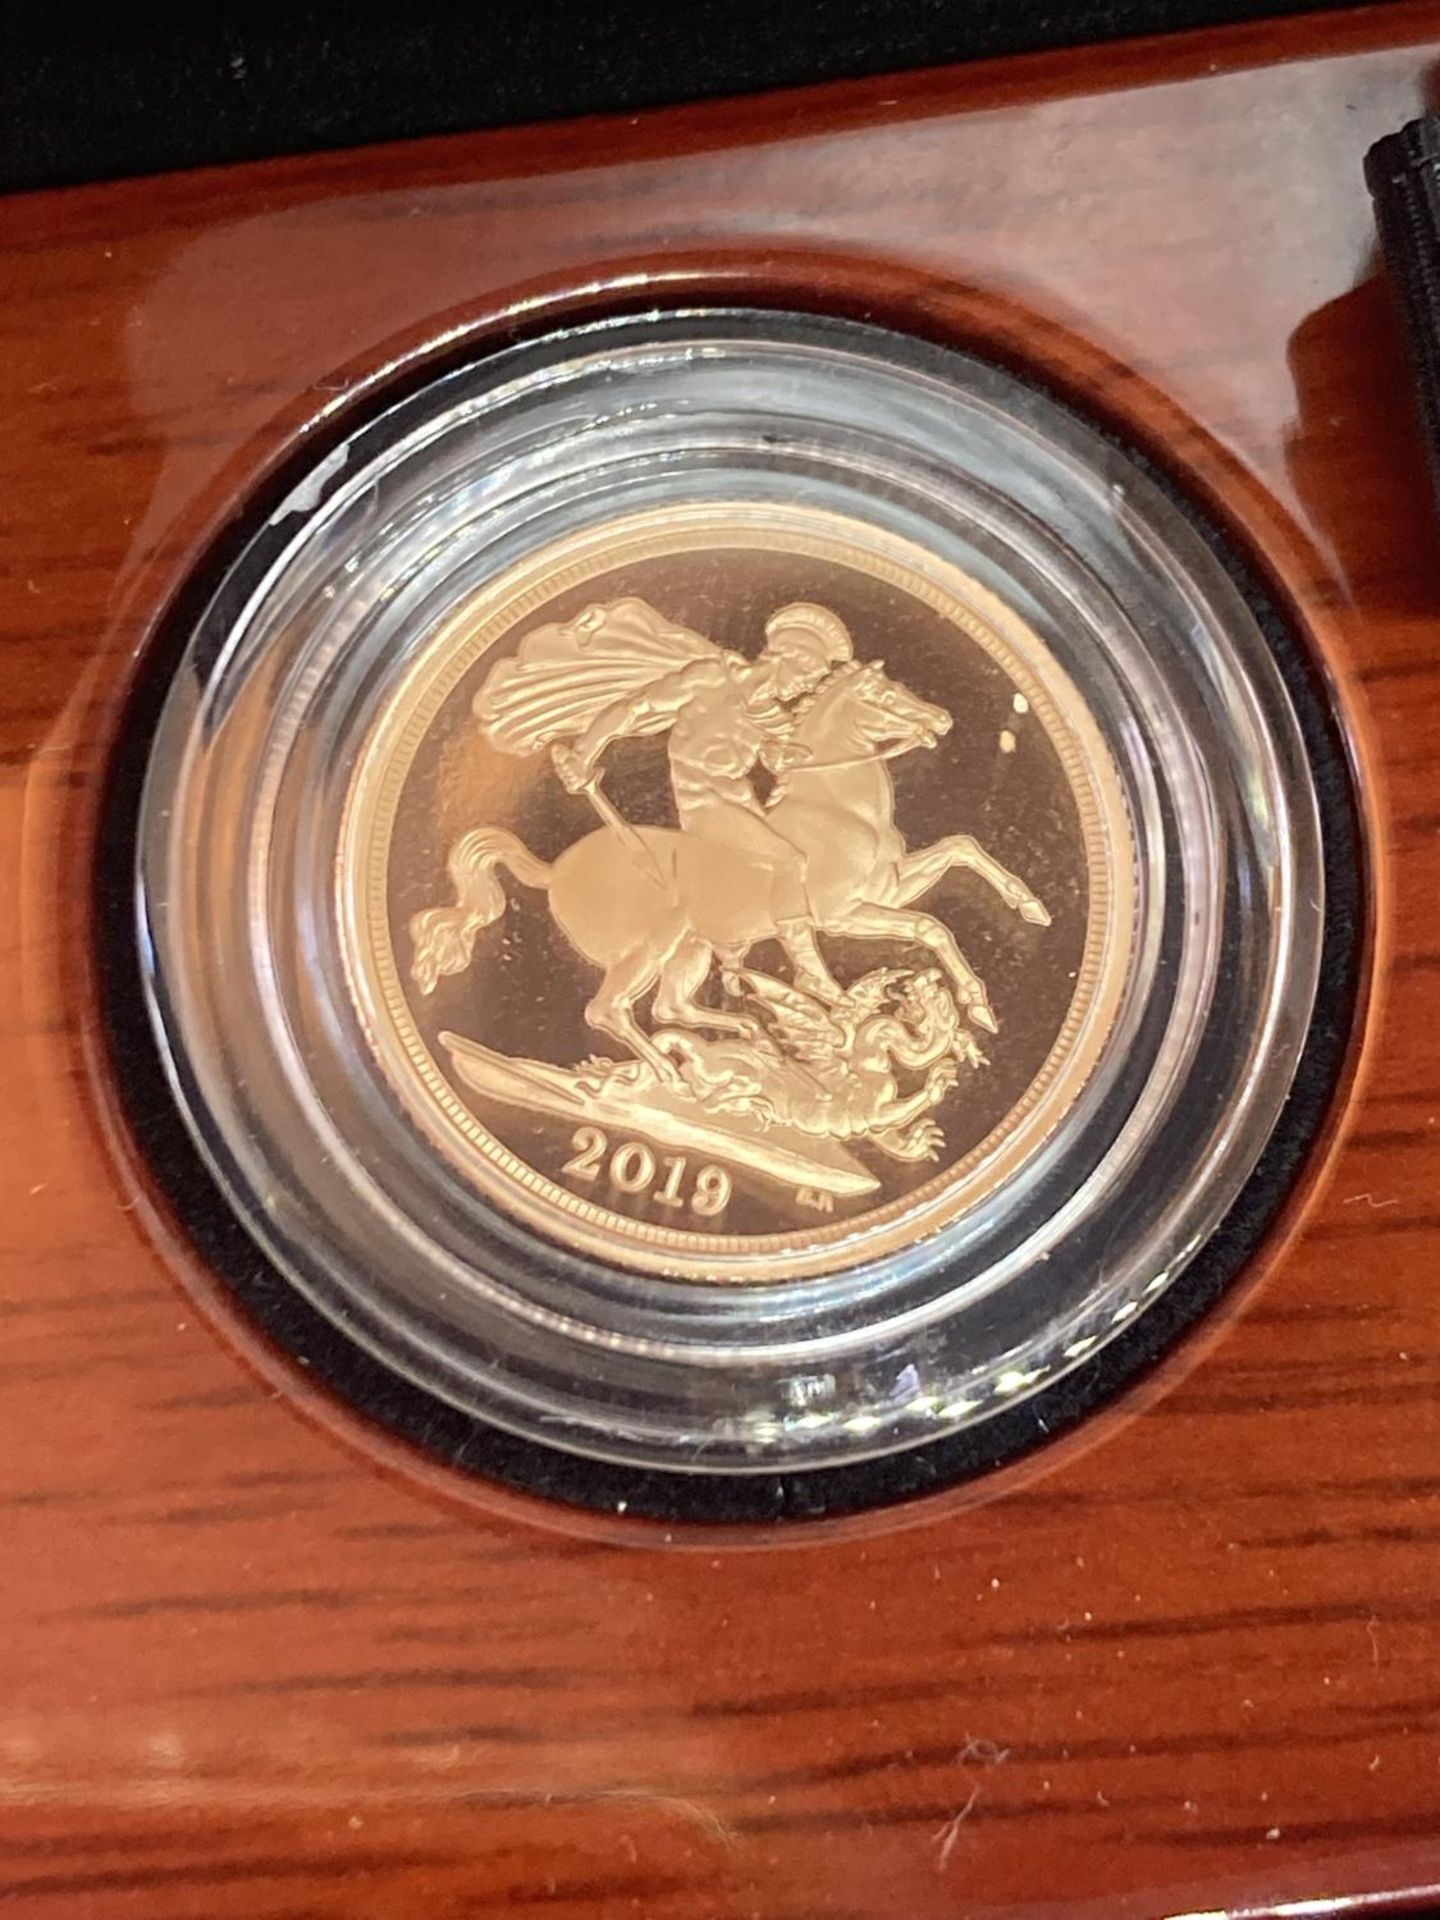 A 2019 THE SOVEREIGN GOLD PROOF LIMITED EDITION NUMBER 6,312 OF 9,500 IN A WOODEN BOXED CASE - Image 2 of 5